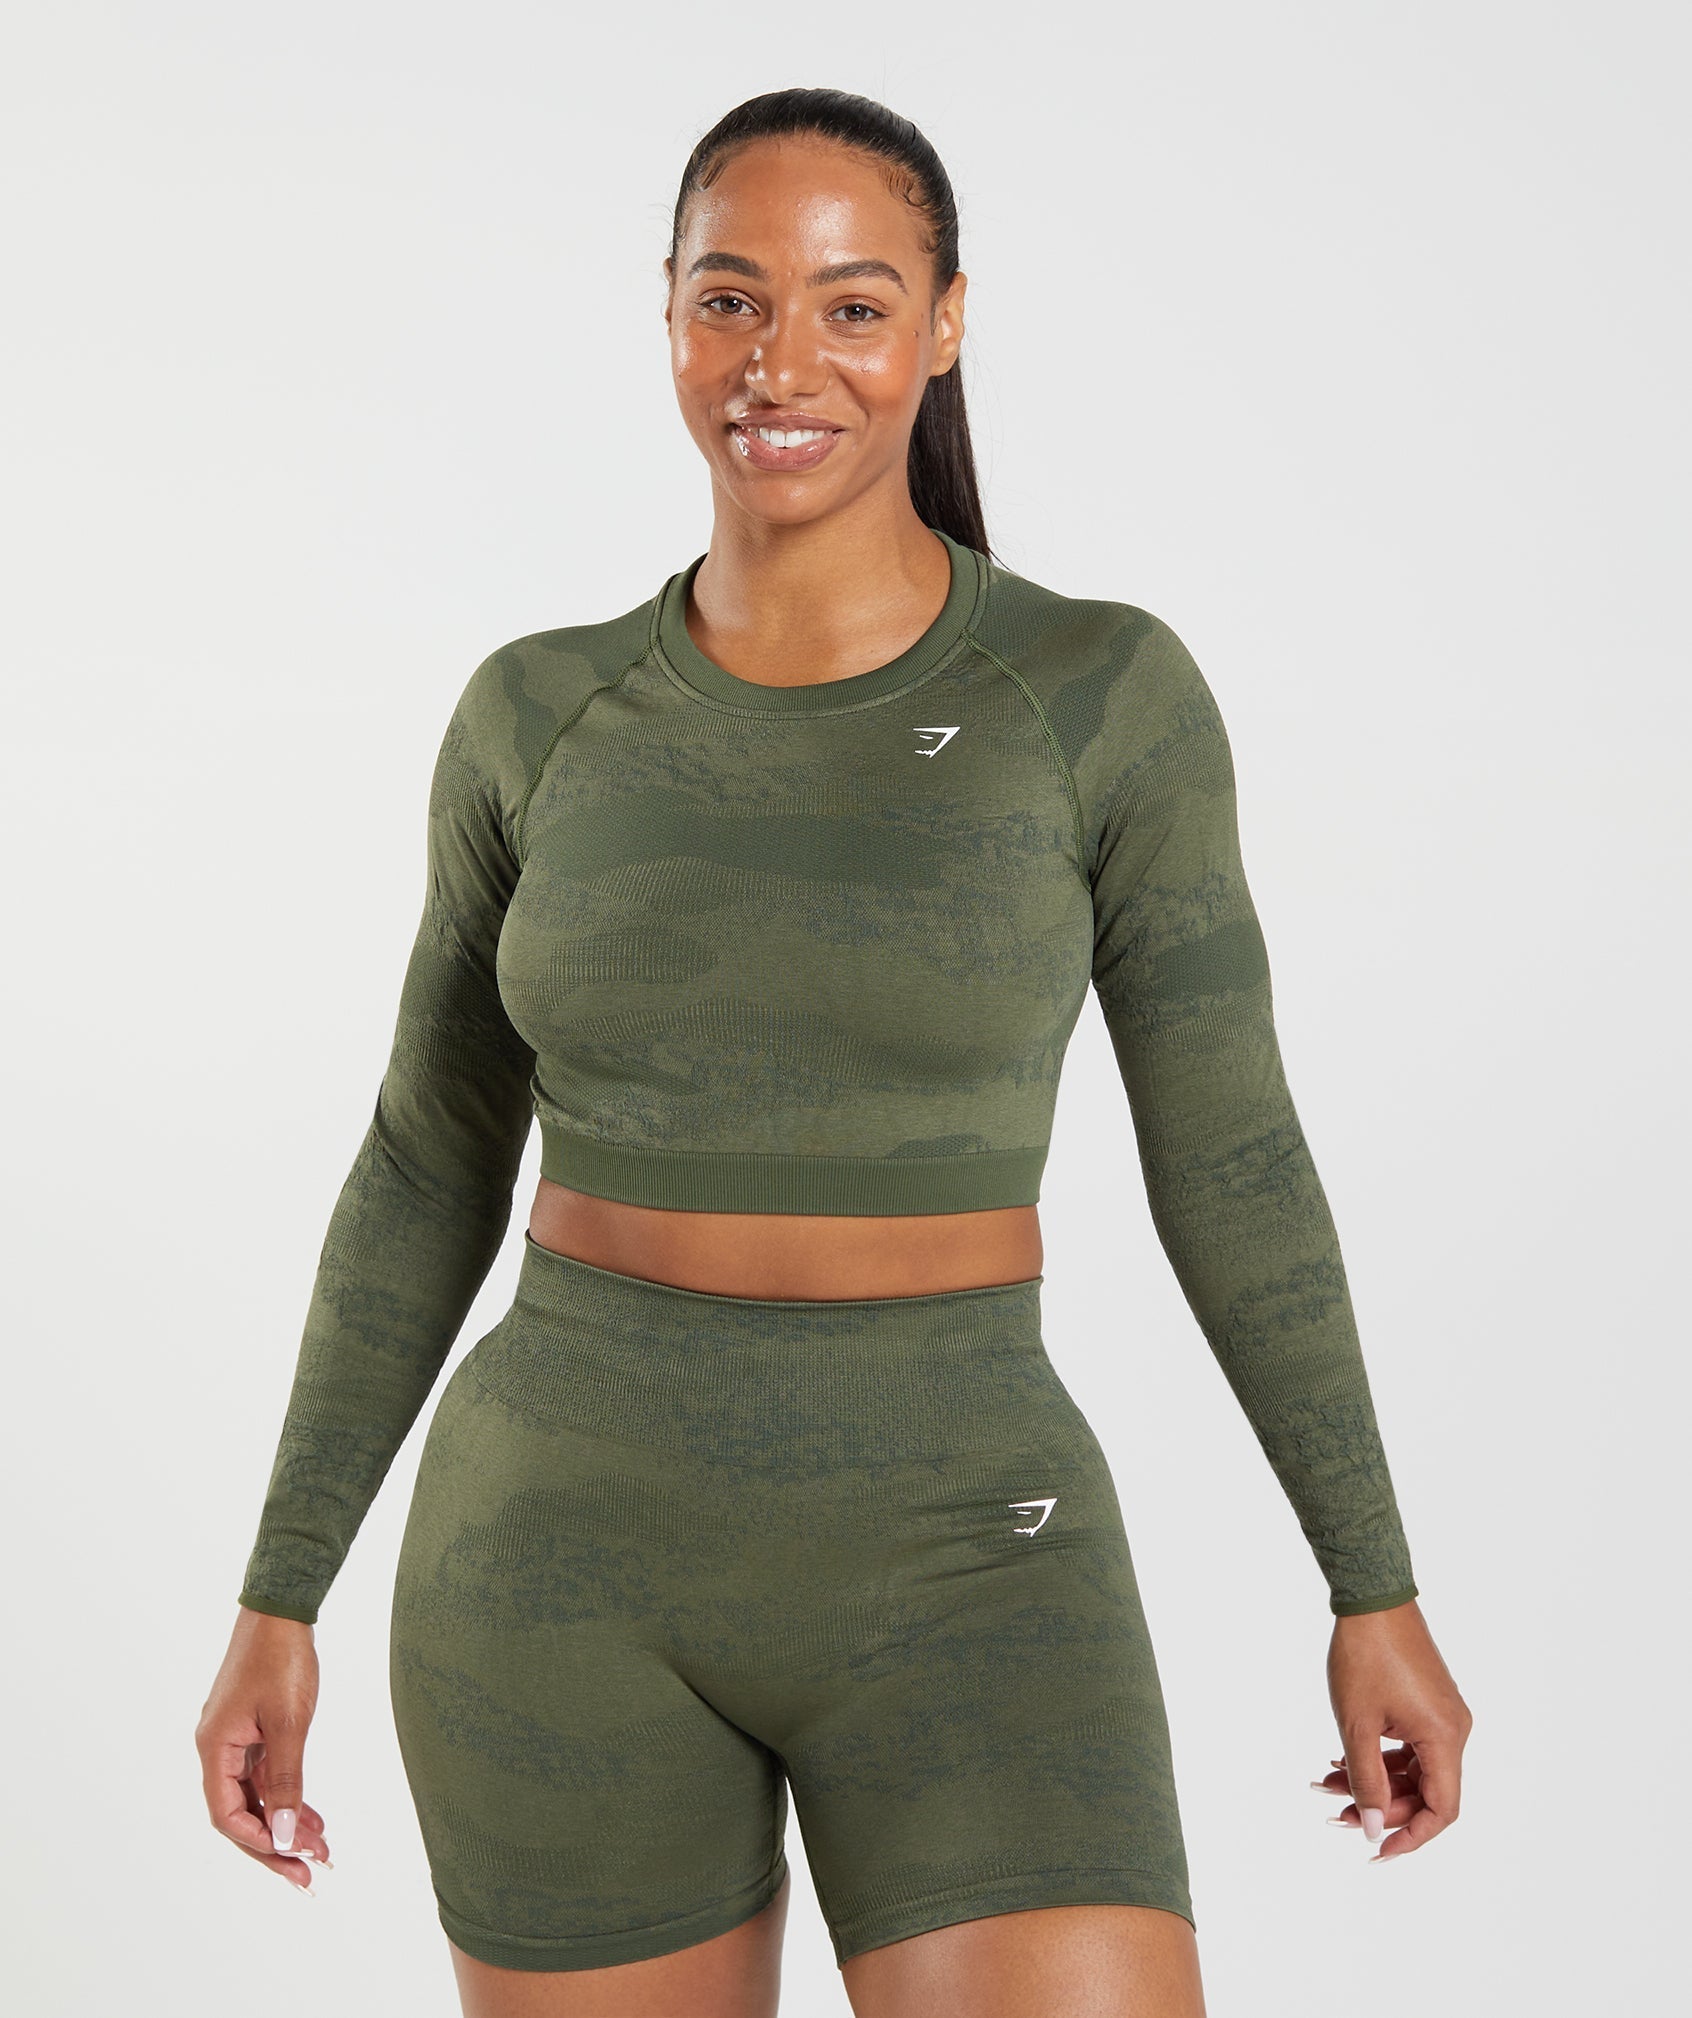 Adapt Camo Seamless Lace Up Back Top in Moss Olive/Core Olive - view 2